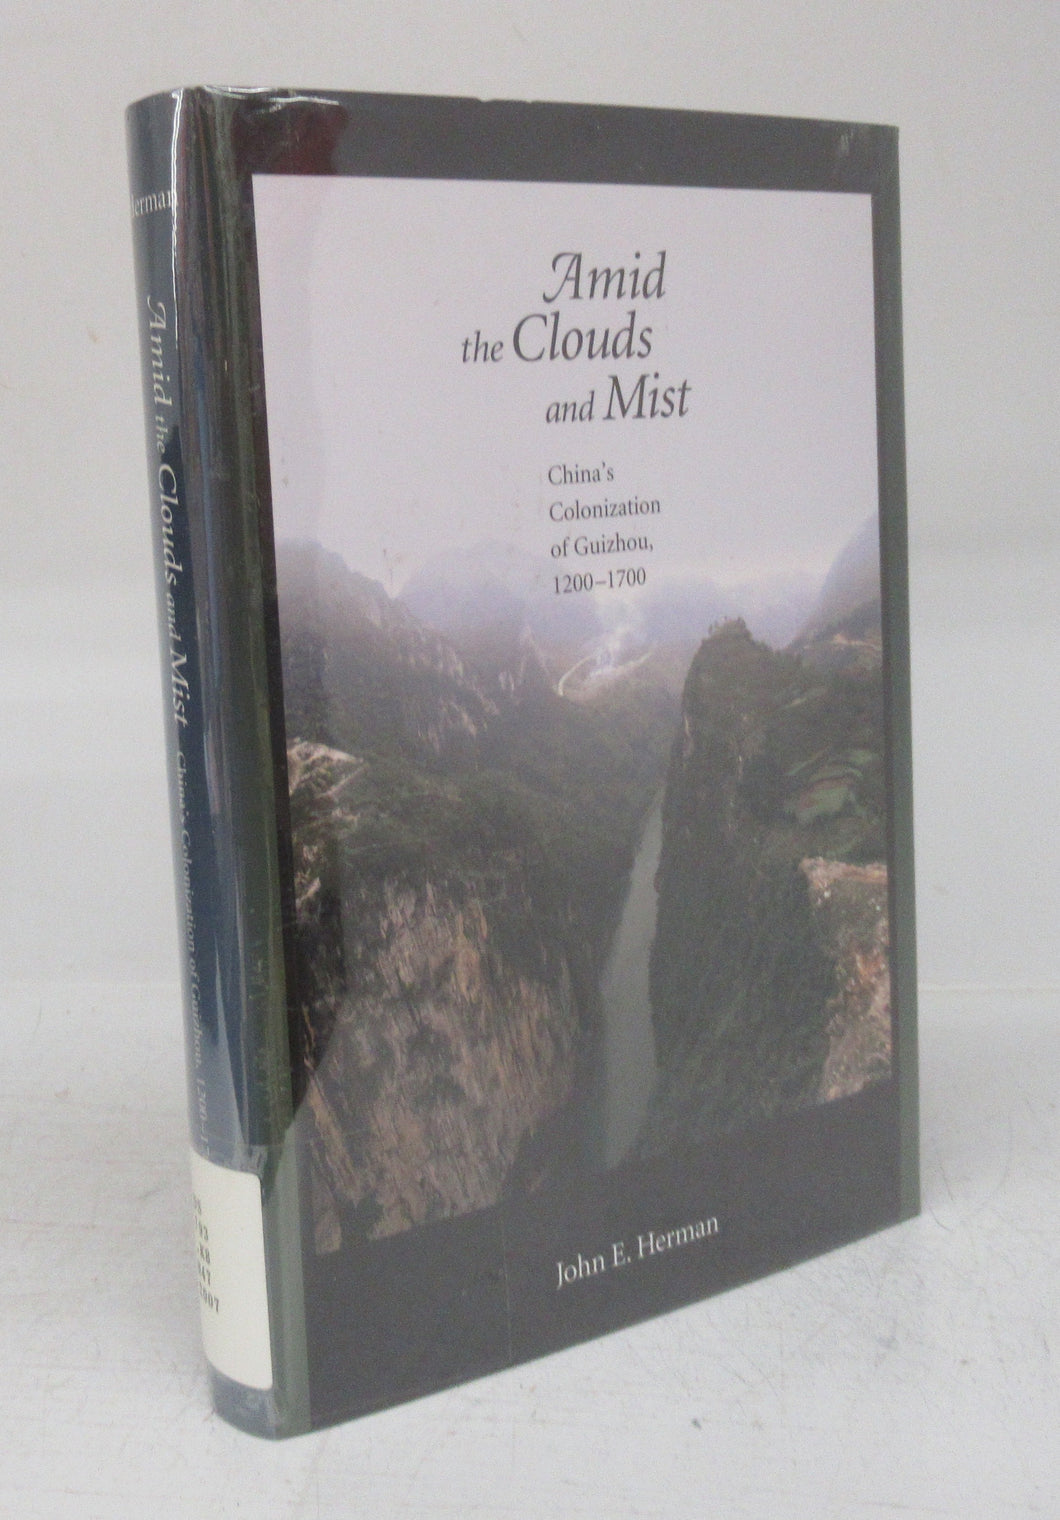 Amid the Clouds and Mist: China's Colonization of Guizhou,1200-1700